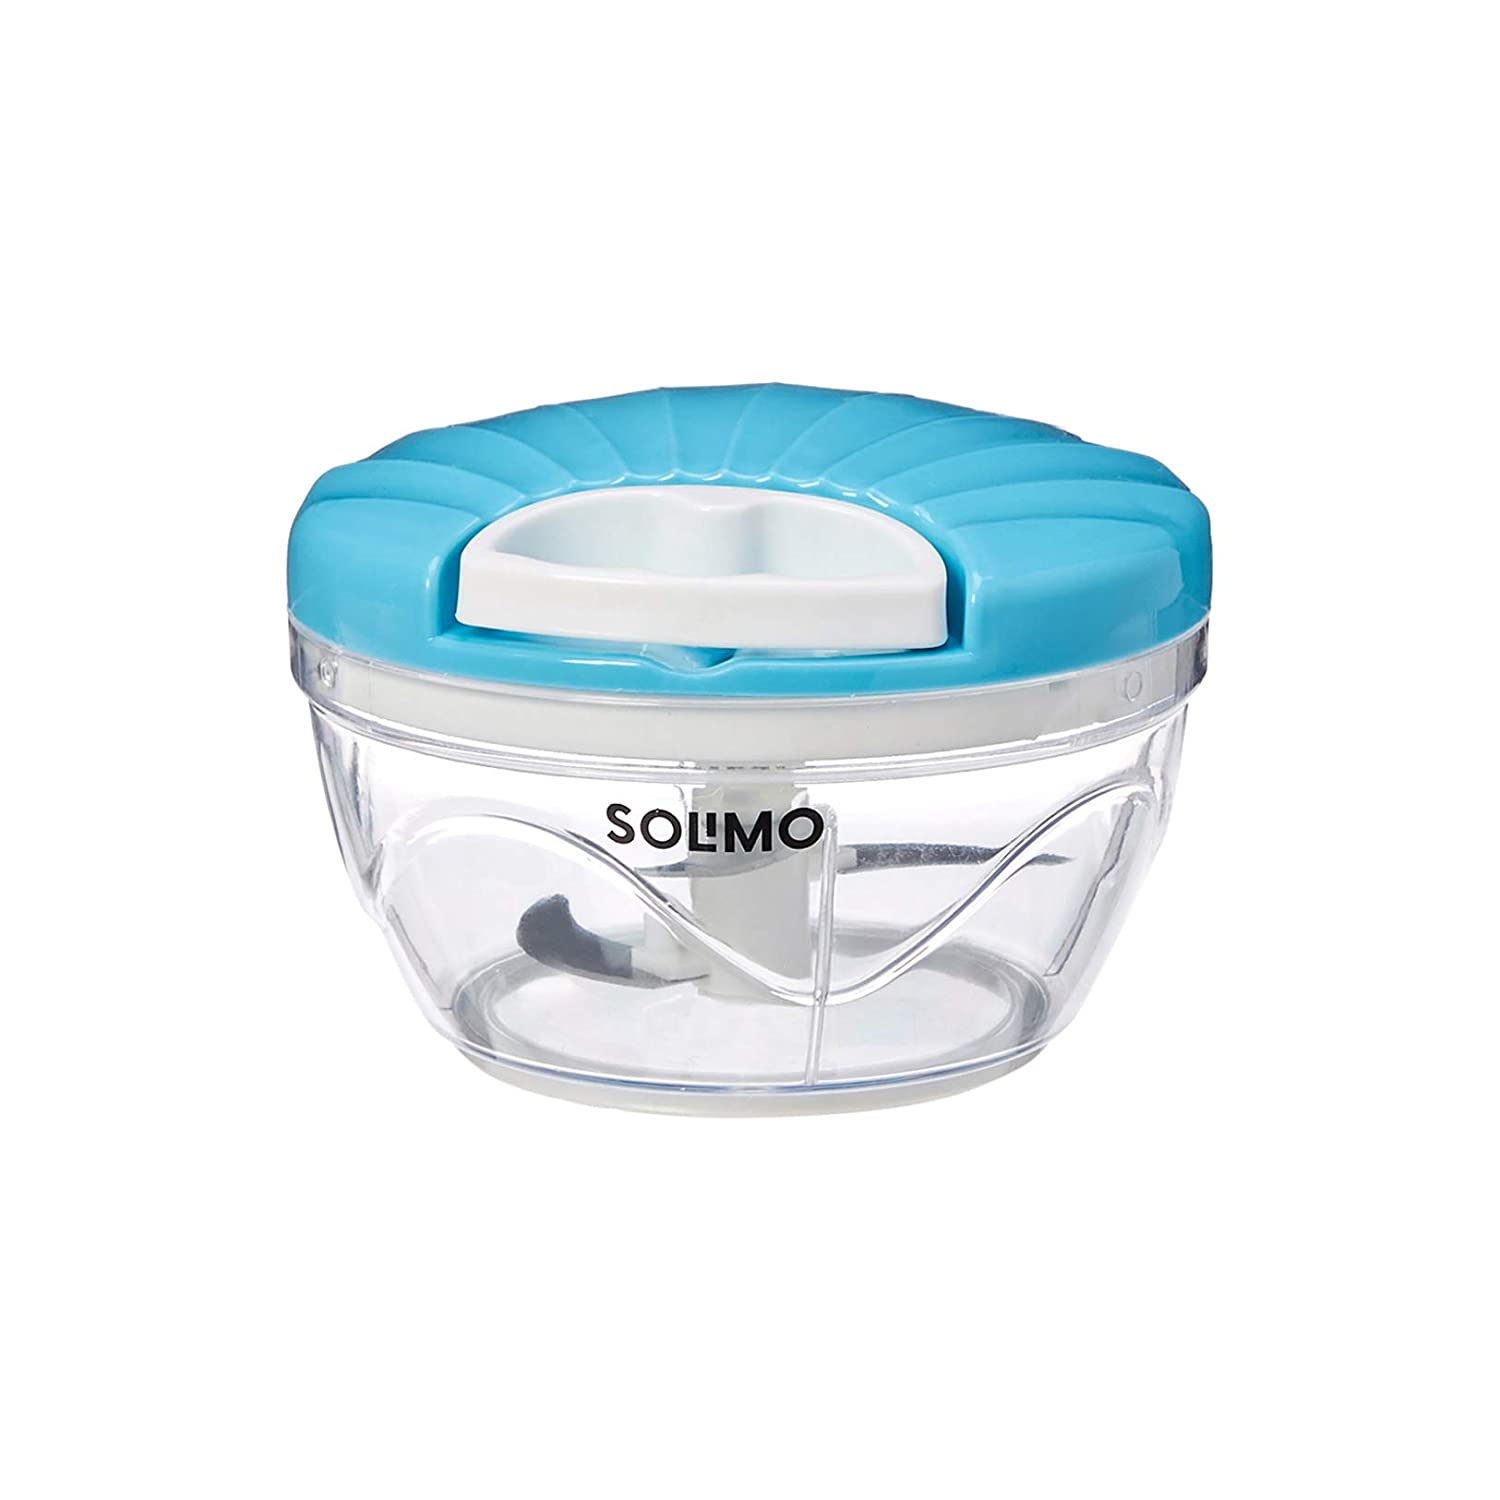 Solimo 500ml Large Vegetable Chopper